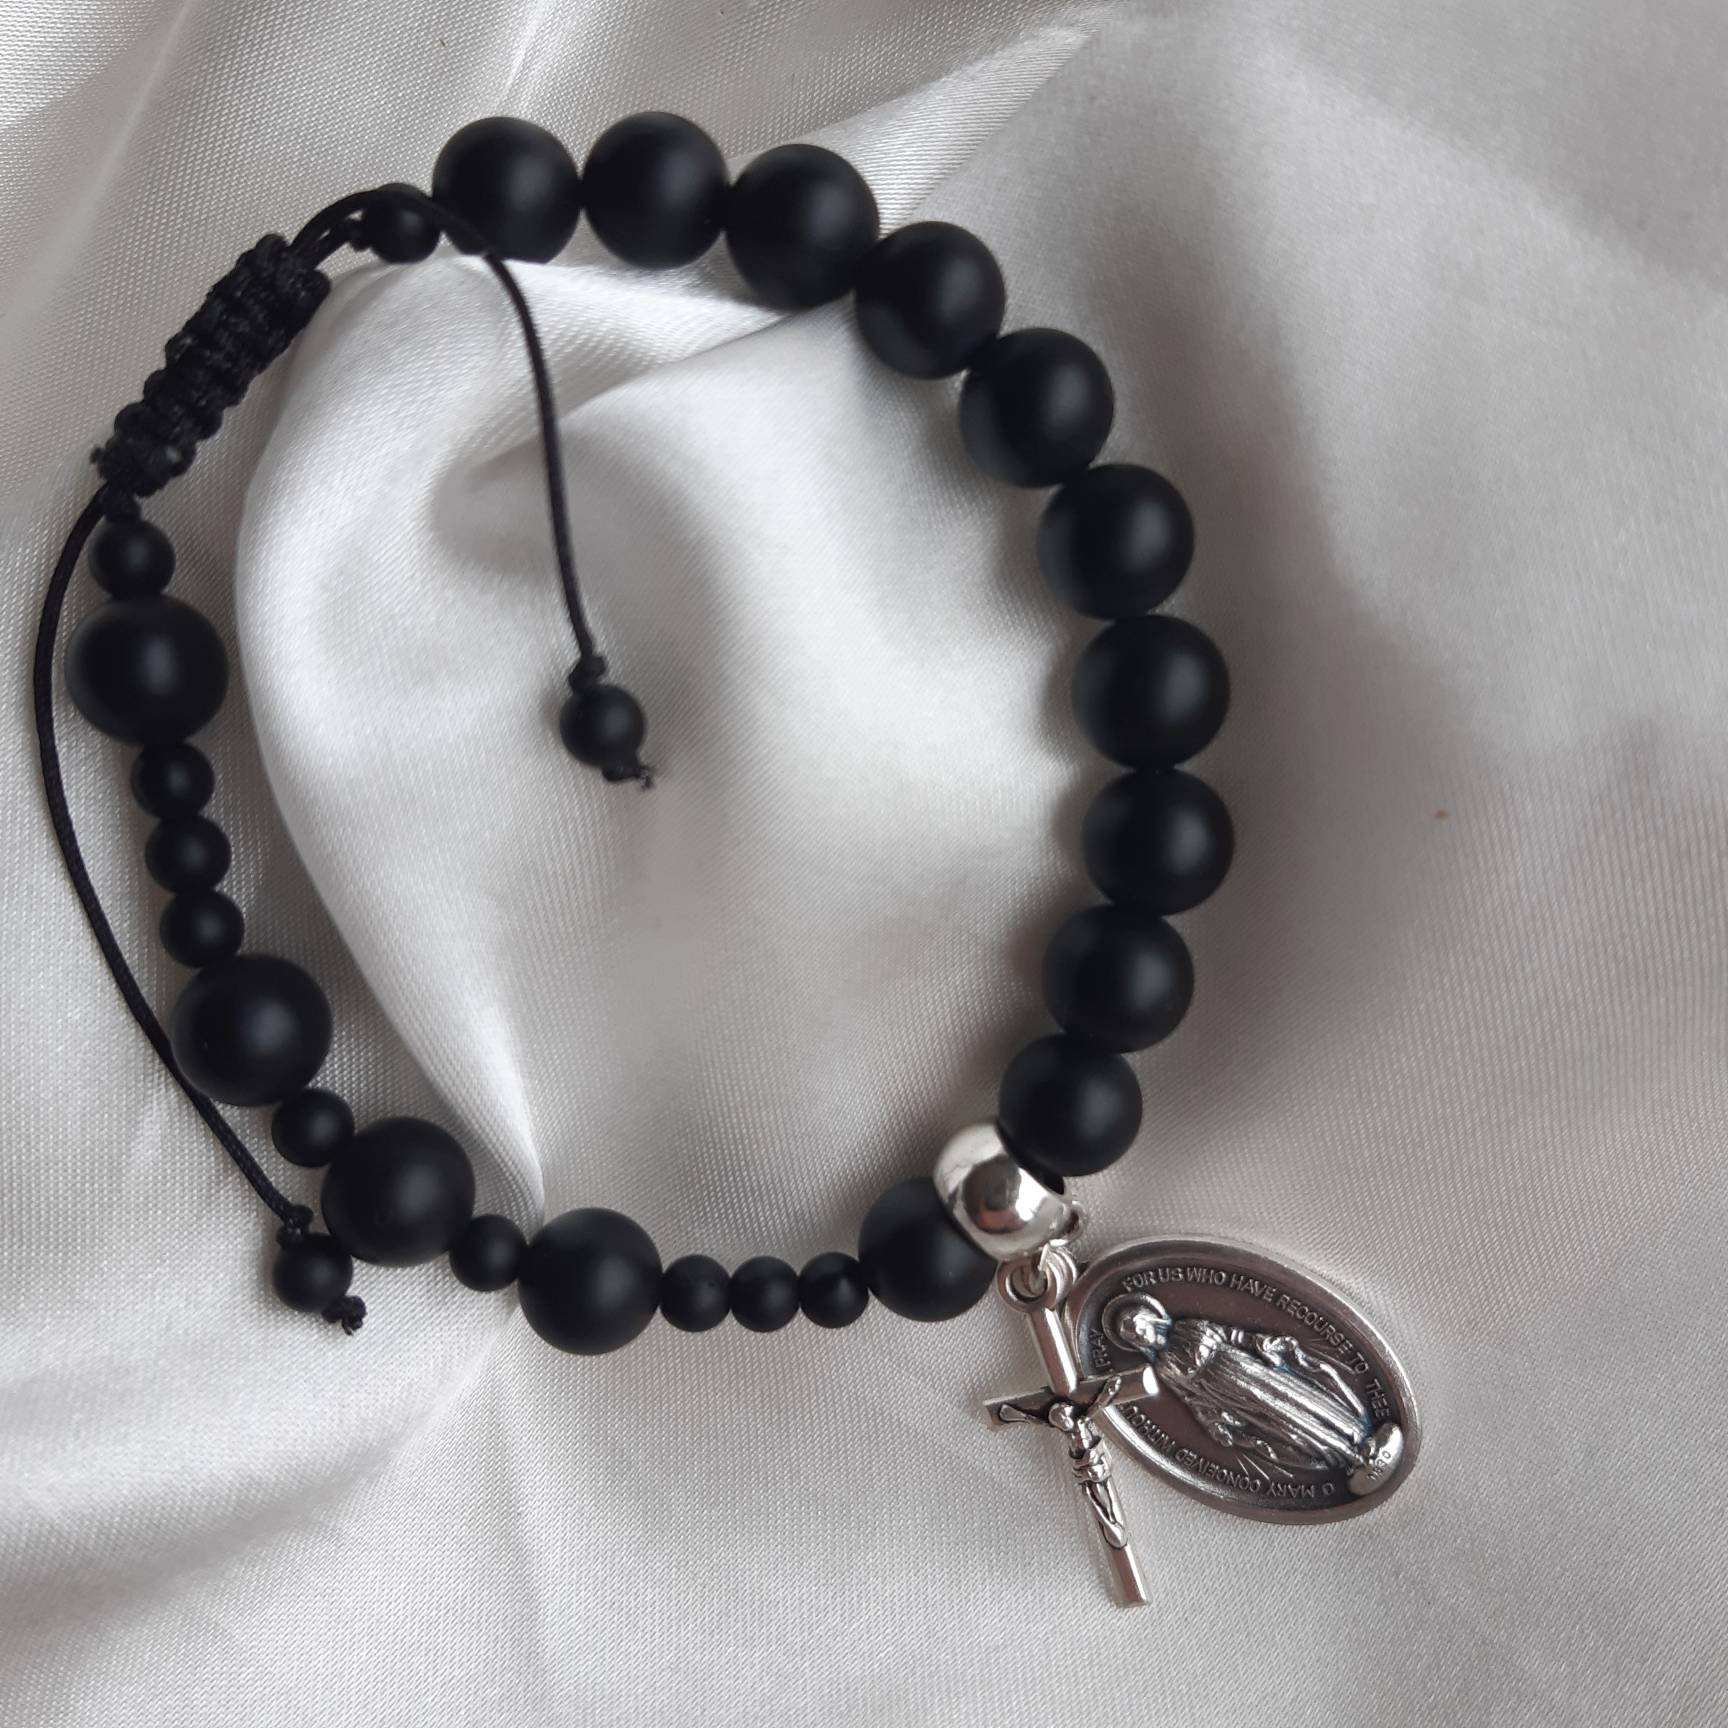 Men's Rosary bracelet. Matte black agate with choice of | Etsy